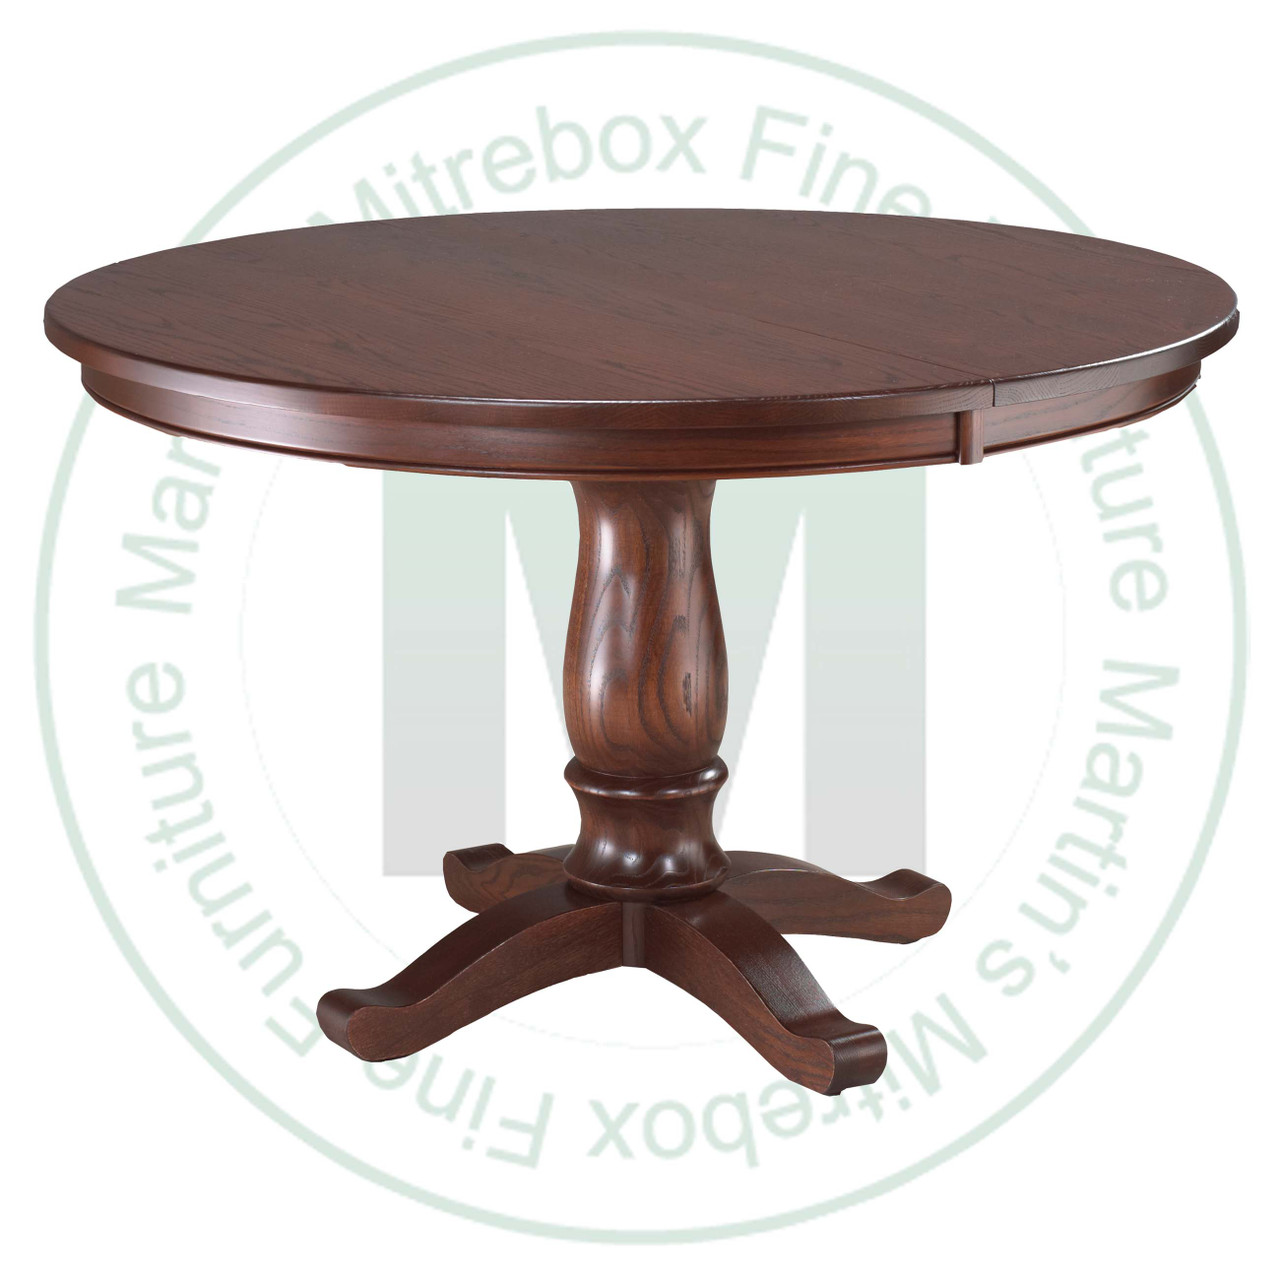 Maple Kimberly Crest Single Pedestal Table 36''D x 36''W x 30''H With 1 - 12'' Leaf Table. Table Has 1'' Thick Top.